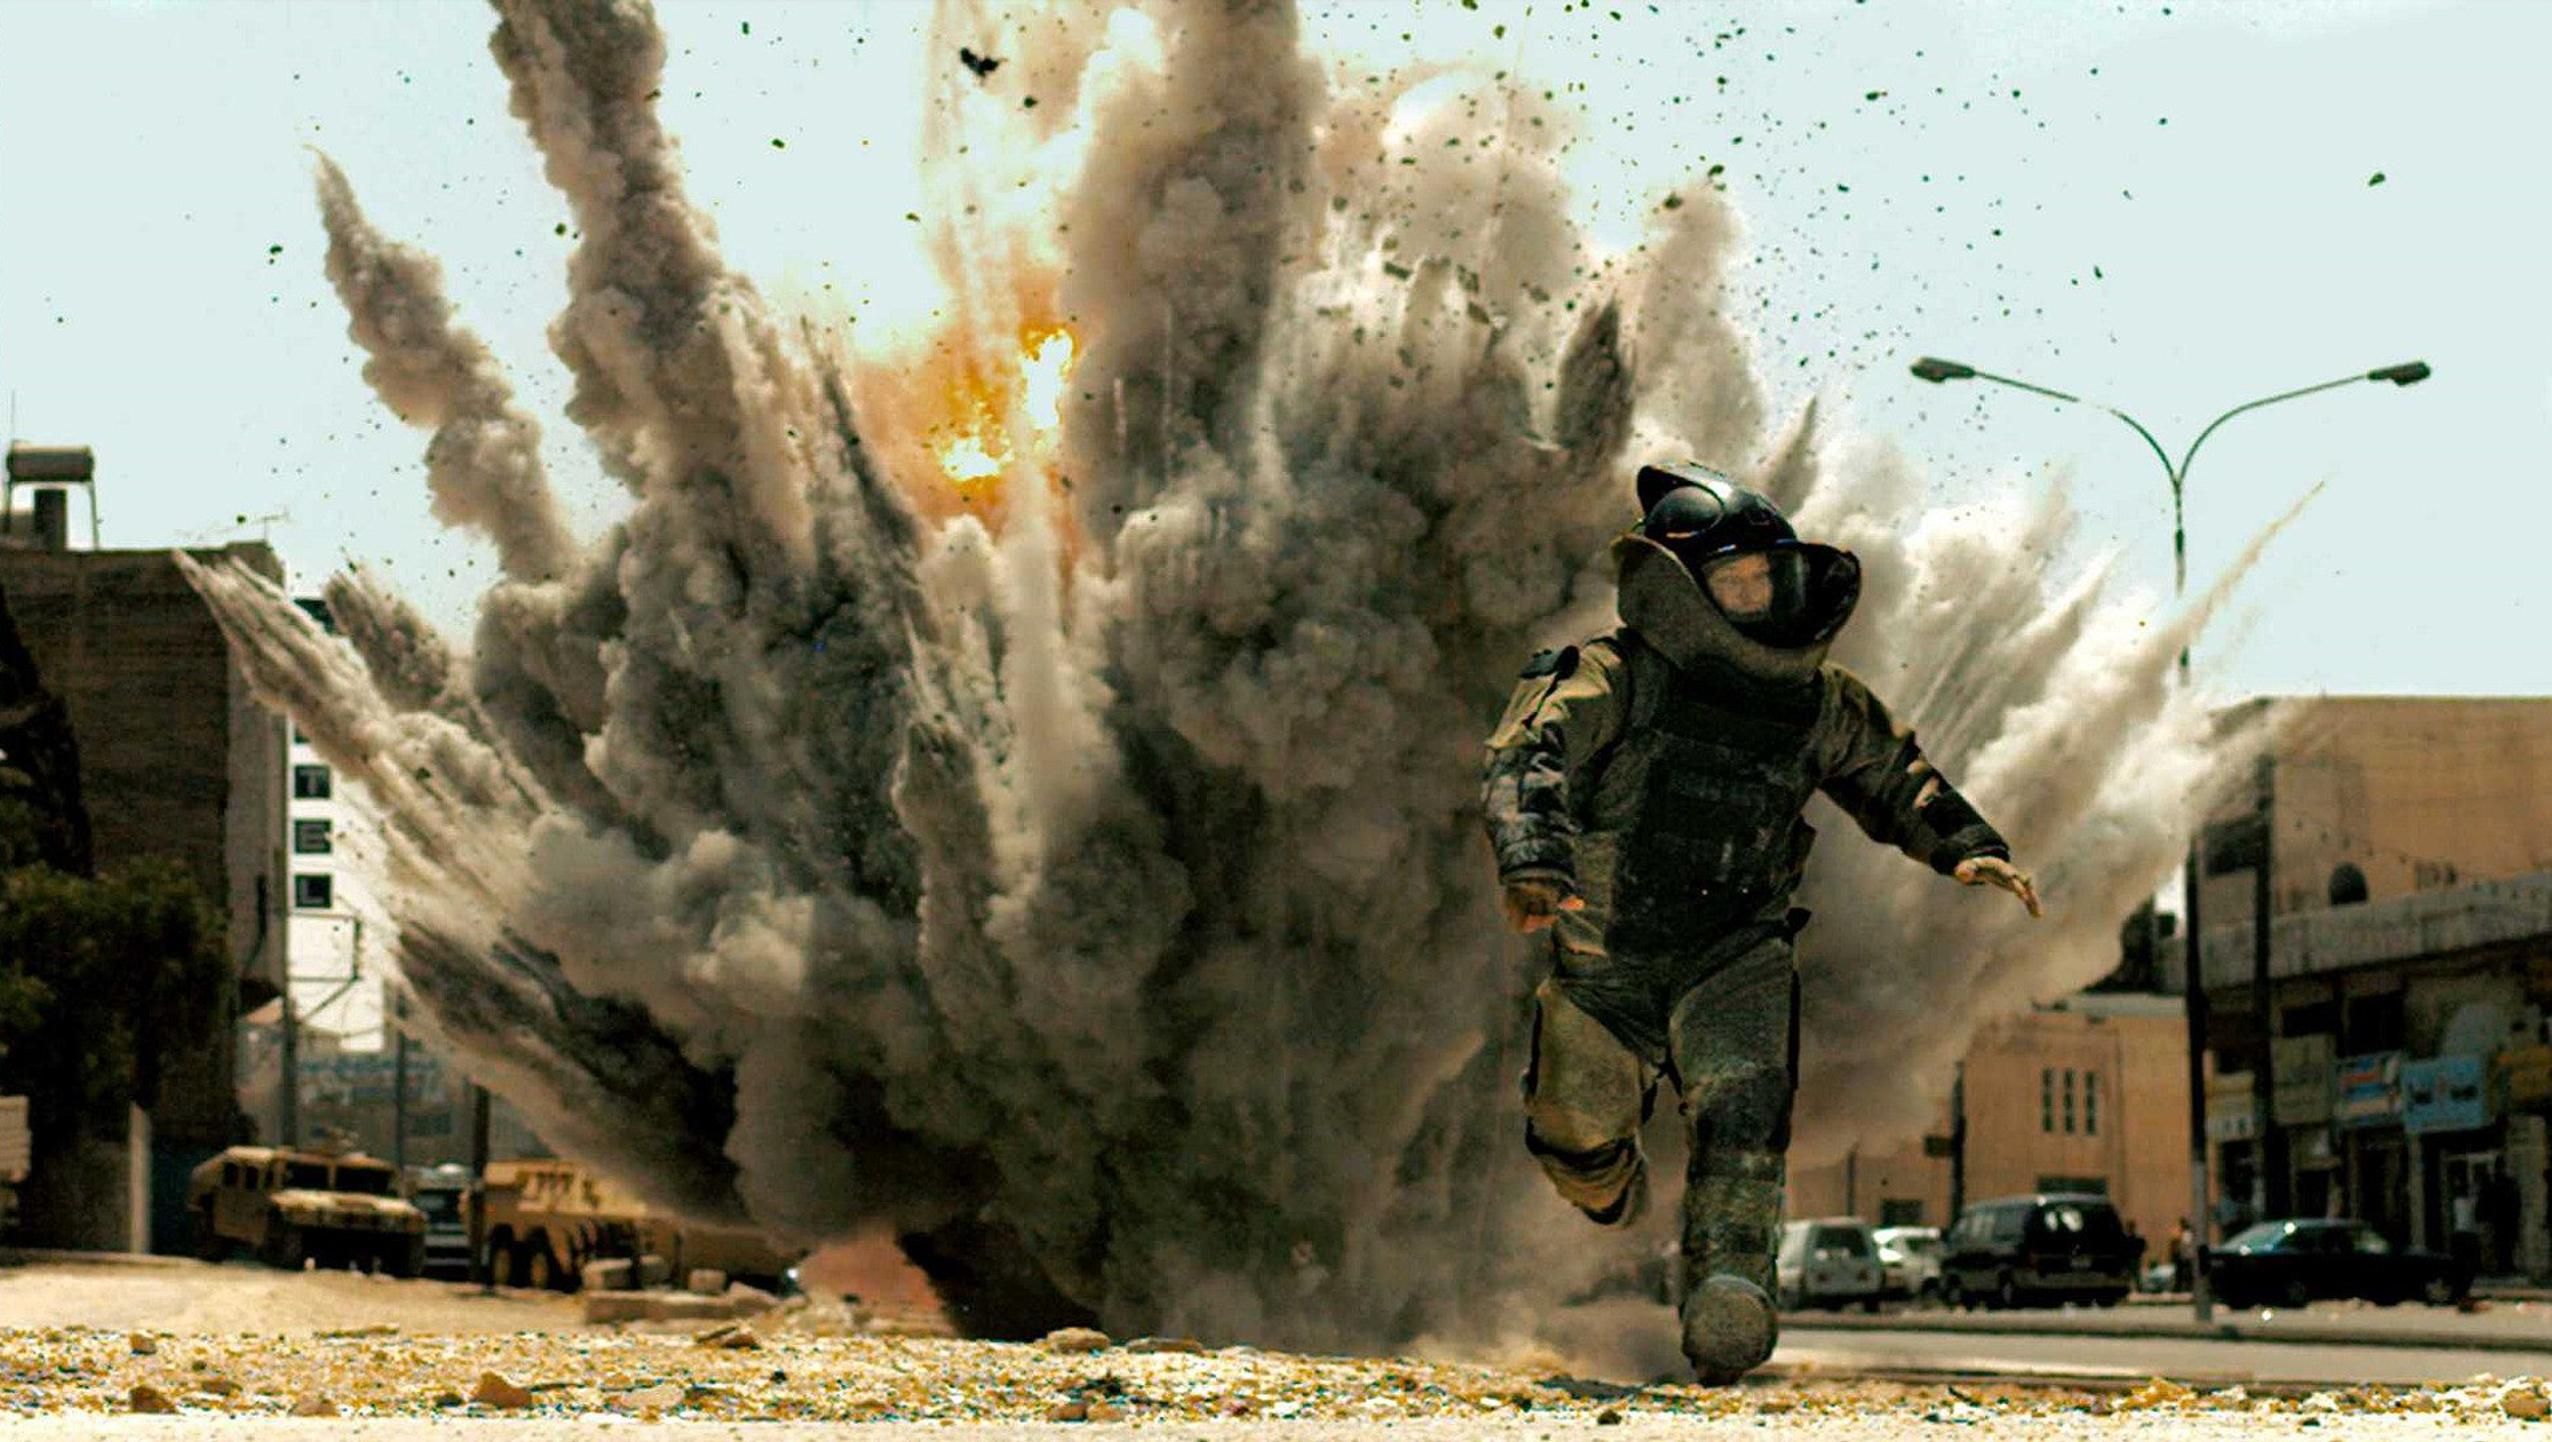 A scene with an explosion in the film The Hurt Locker